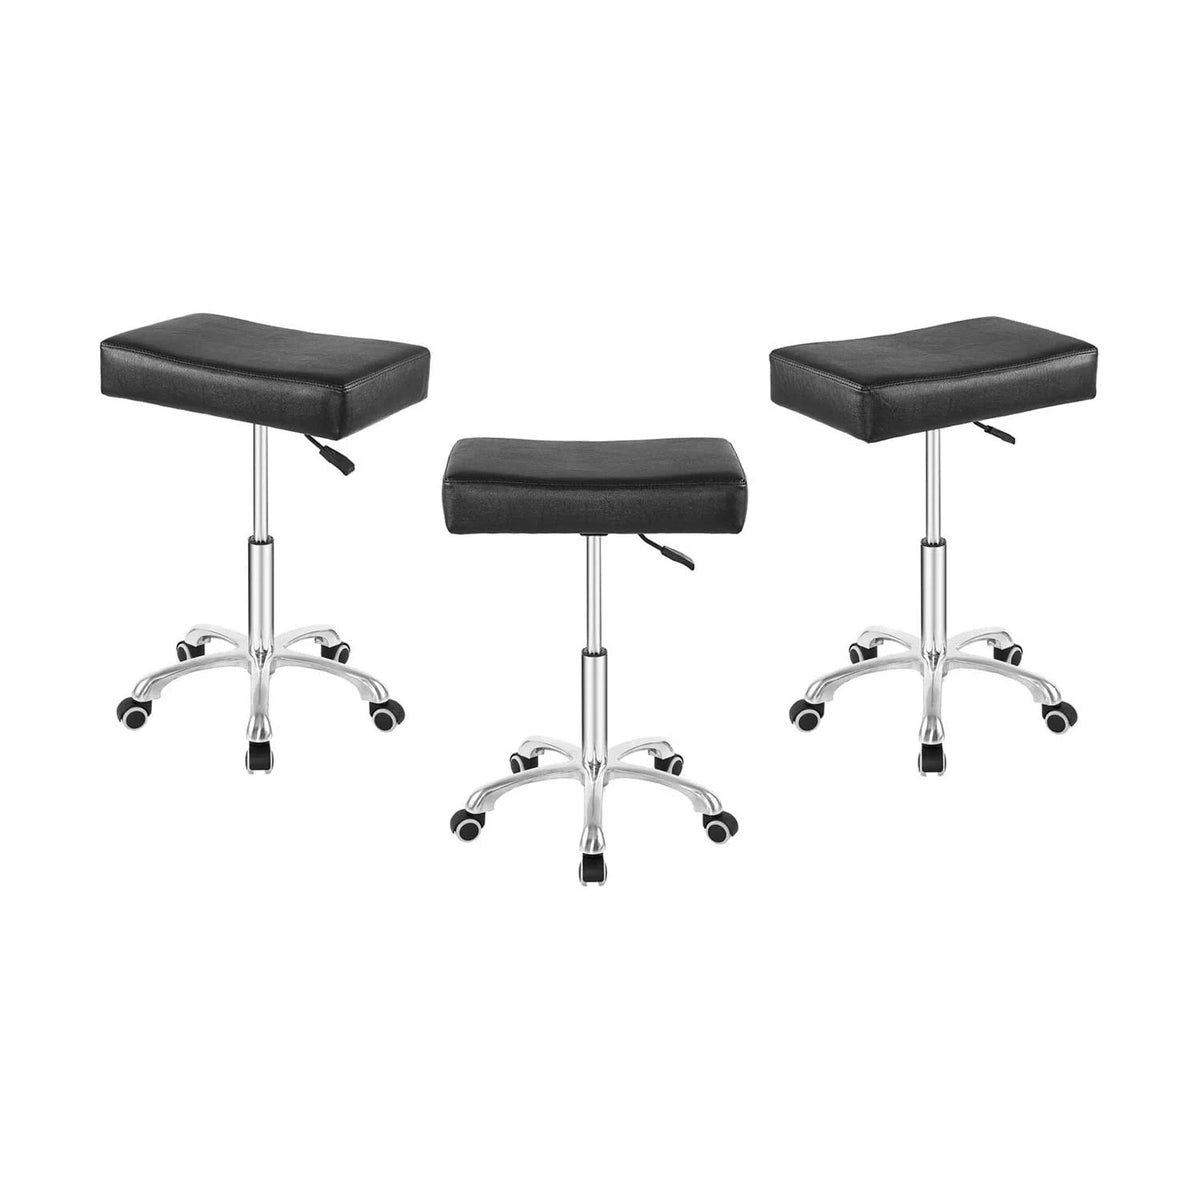 SmileSellers Rolling Swivel Stool Height Adjustable with Wheels Heavy Duty for Office Home Desk Counter Salon